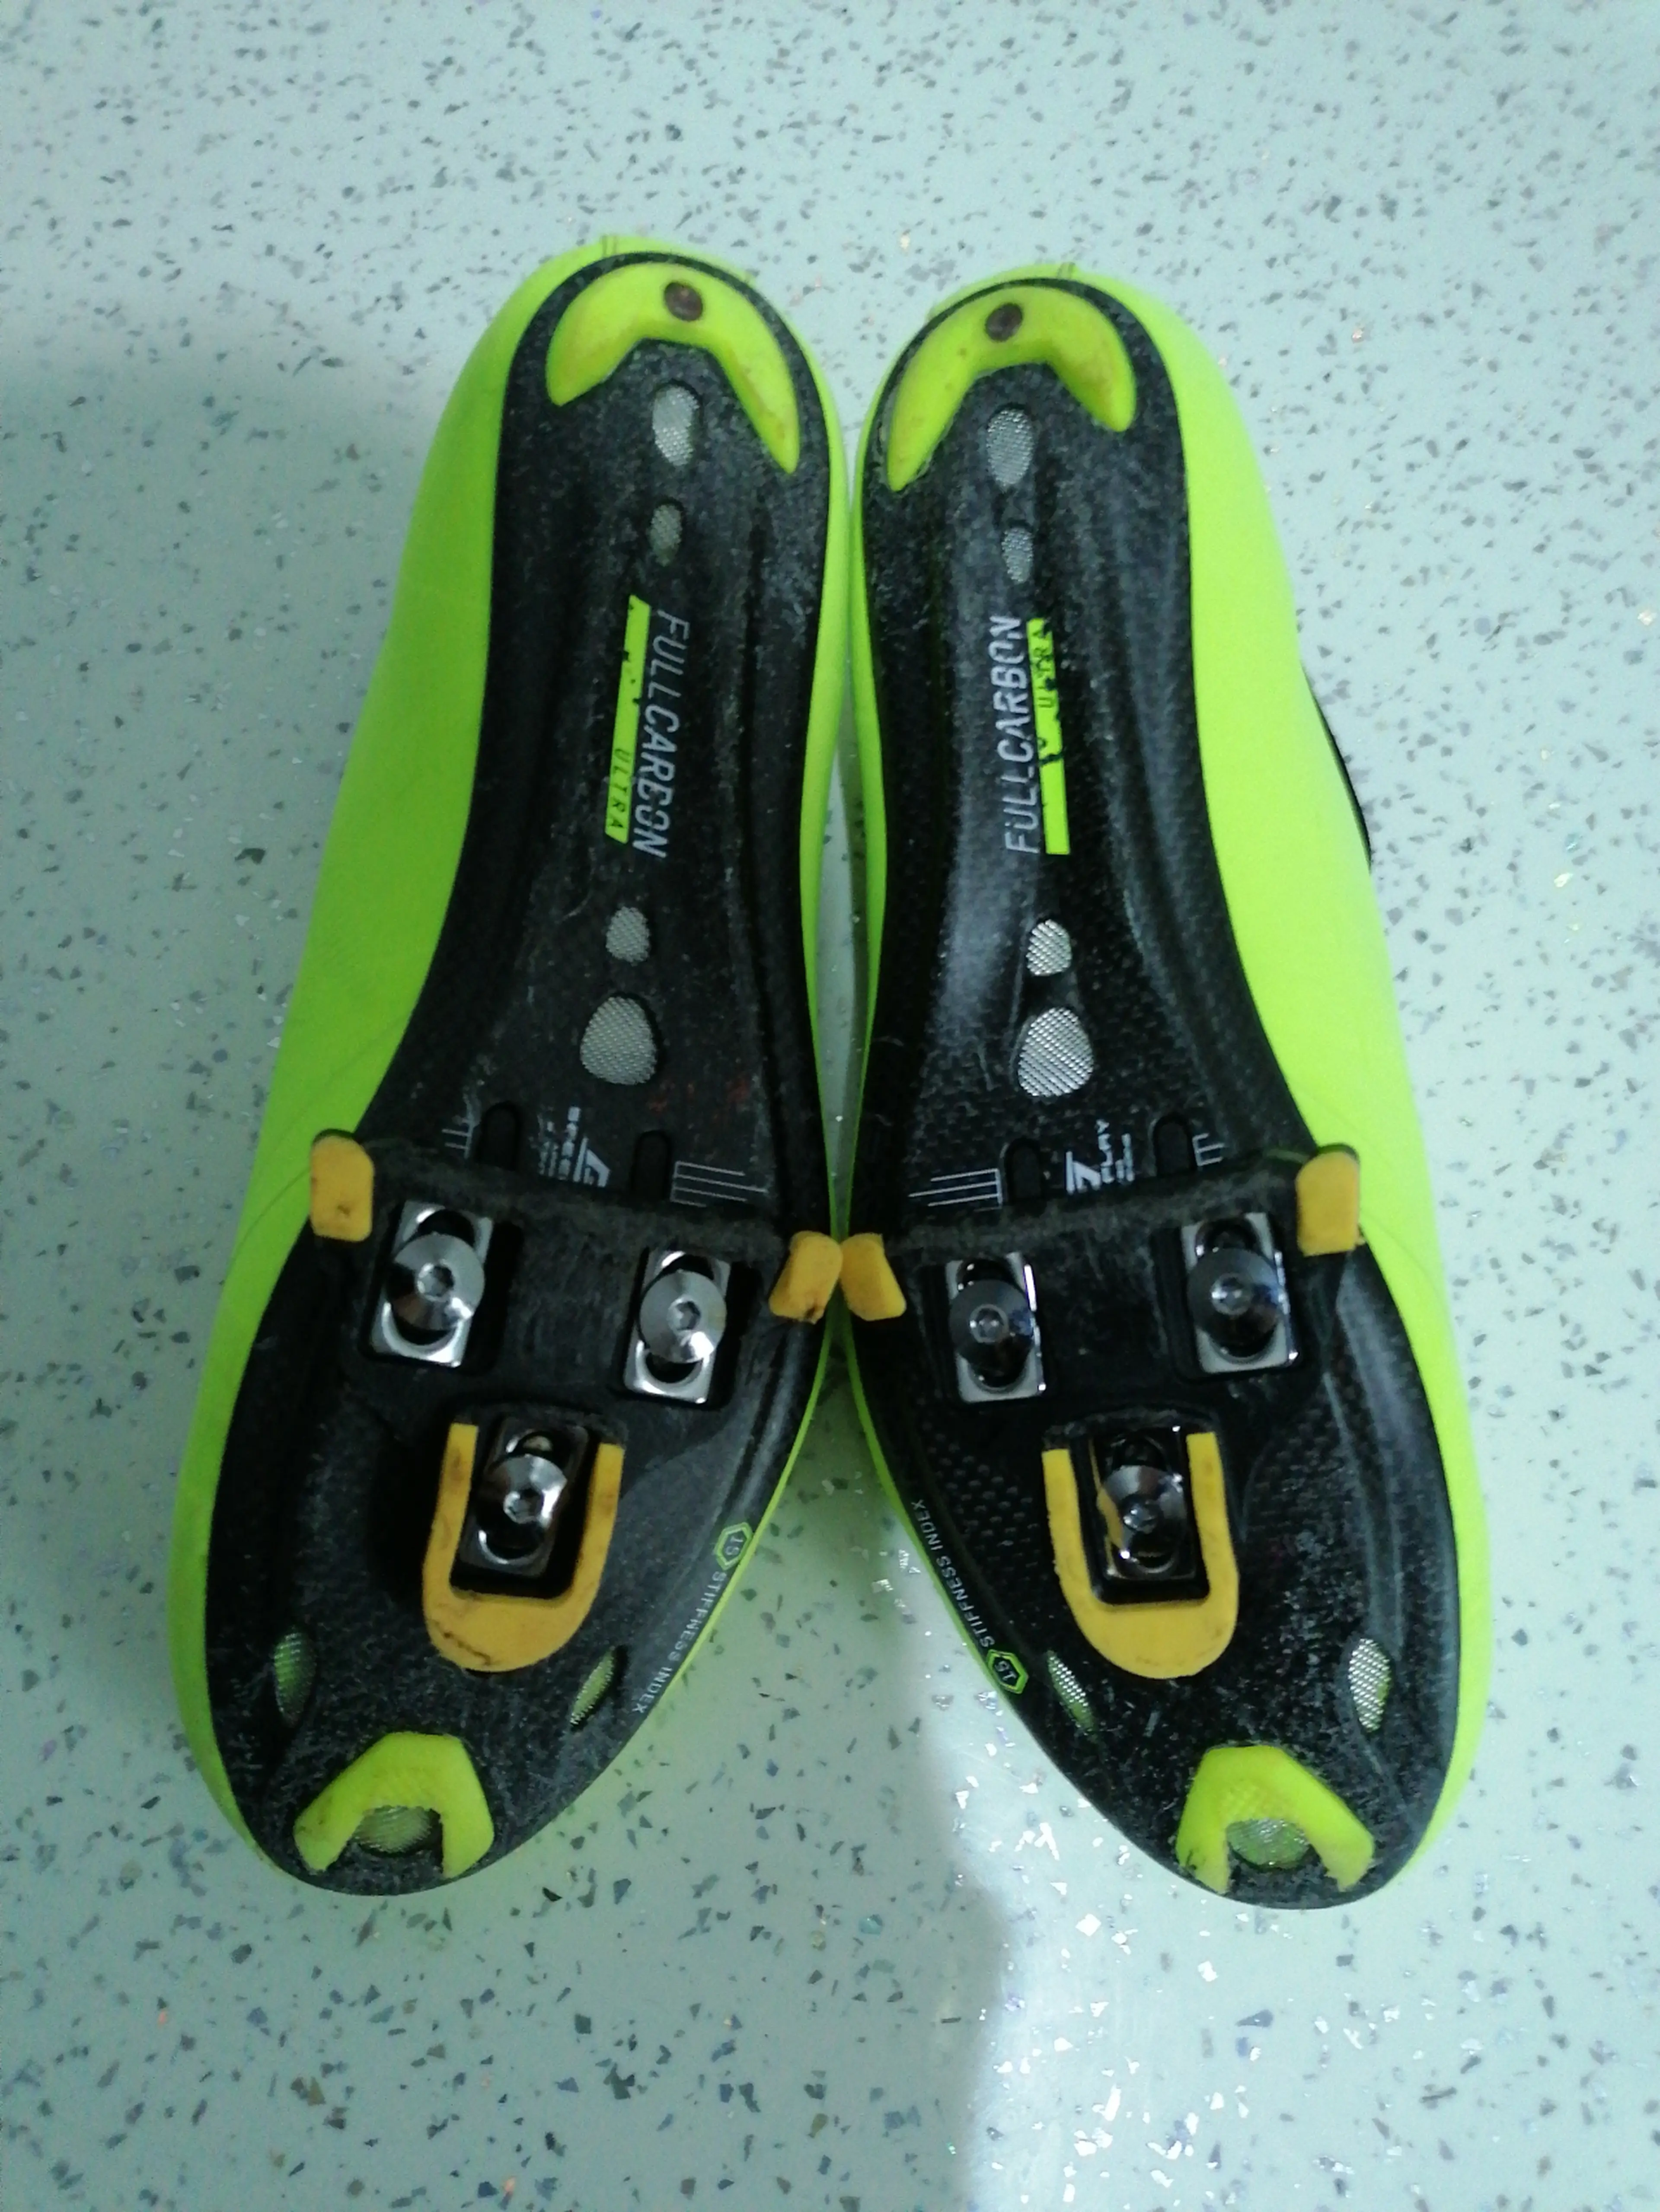 4. Northwave Extreme RR size 42